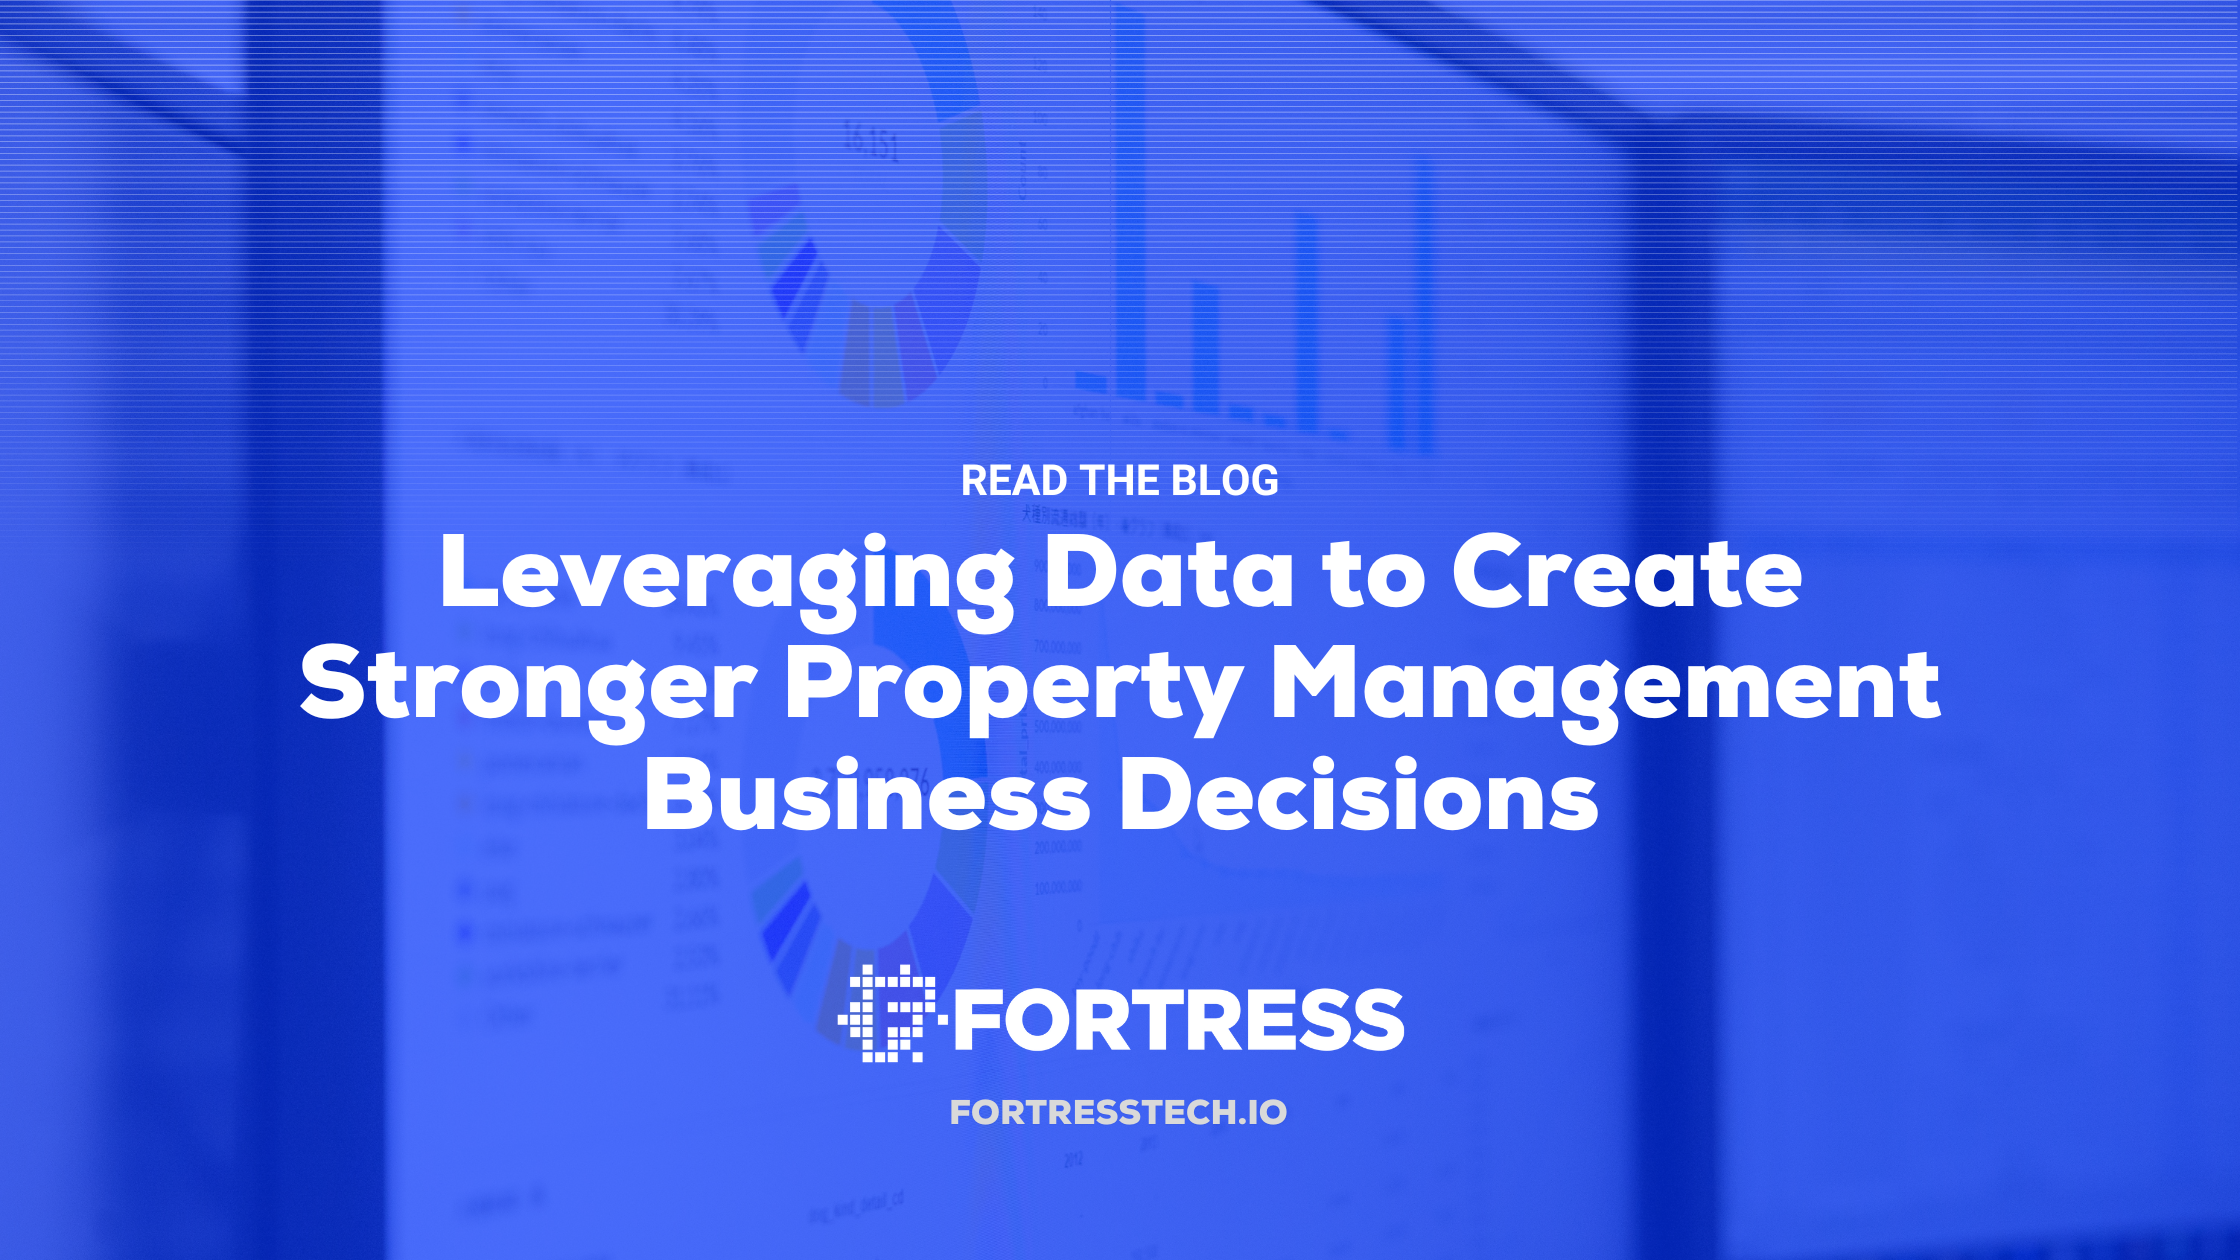 Leveraging Data to Create Stronger Property Management Business Decisions